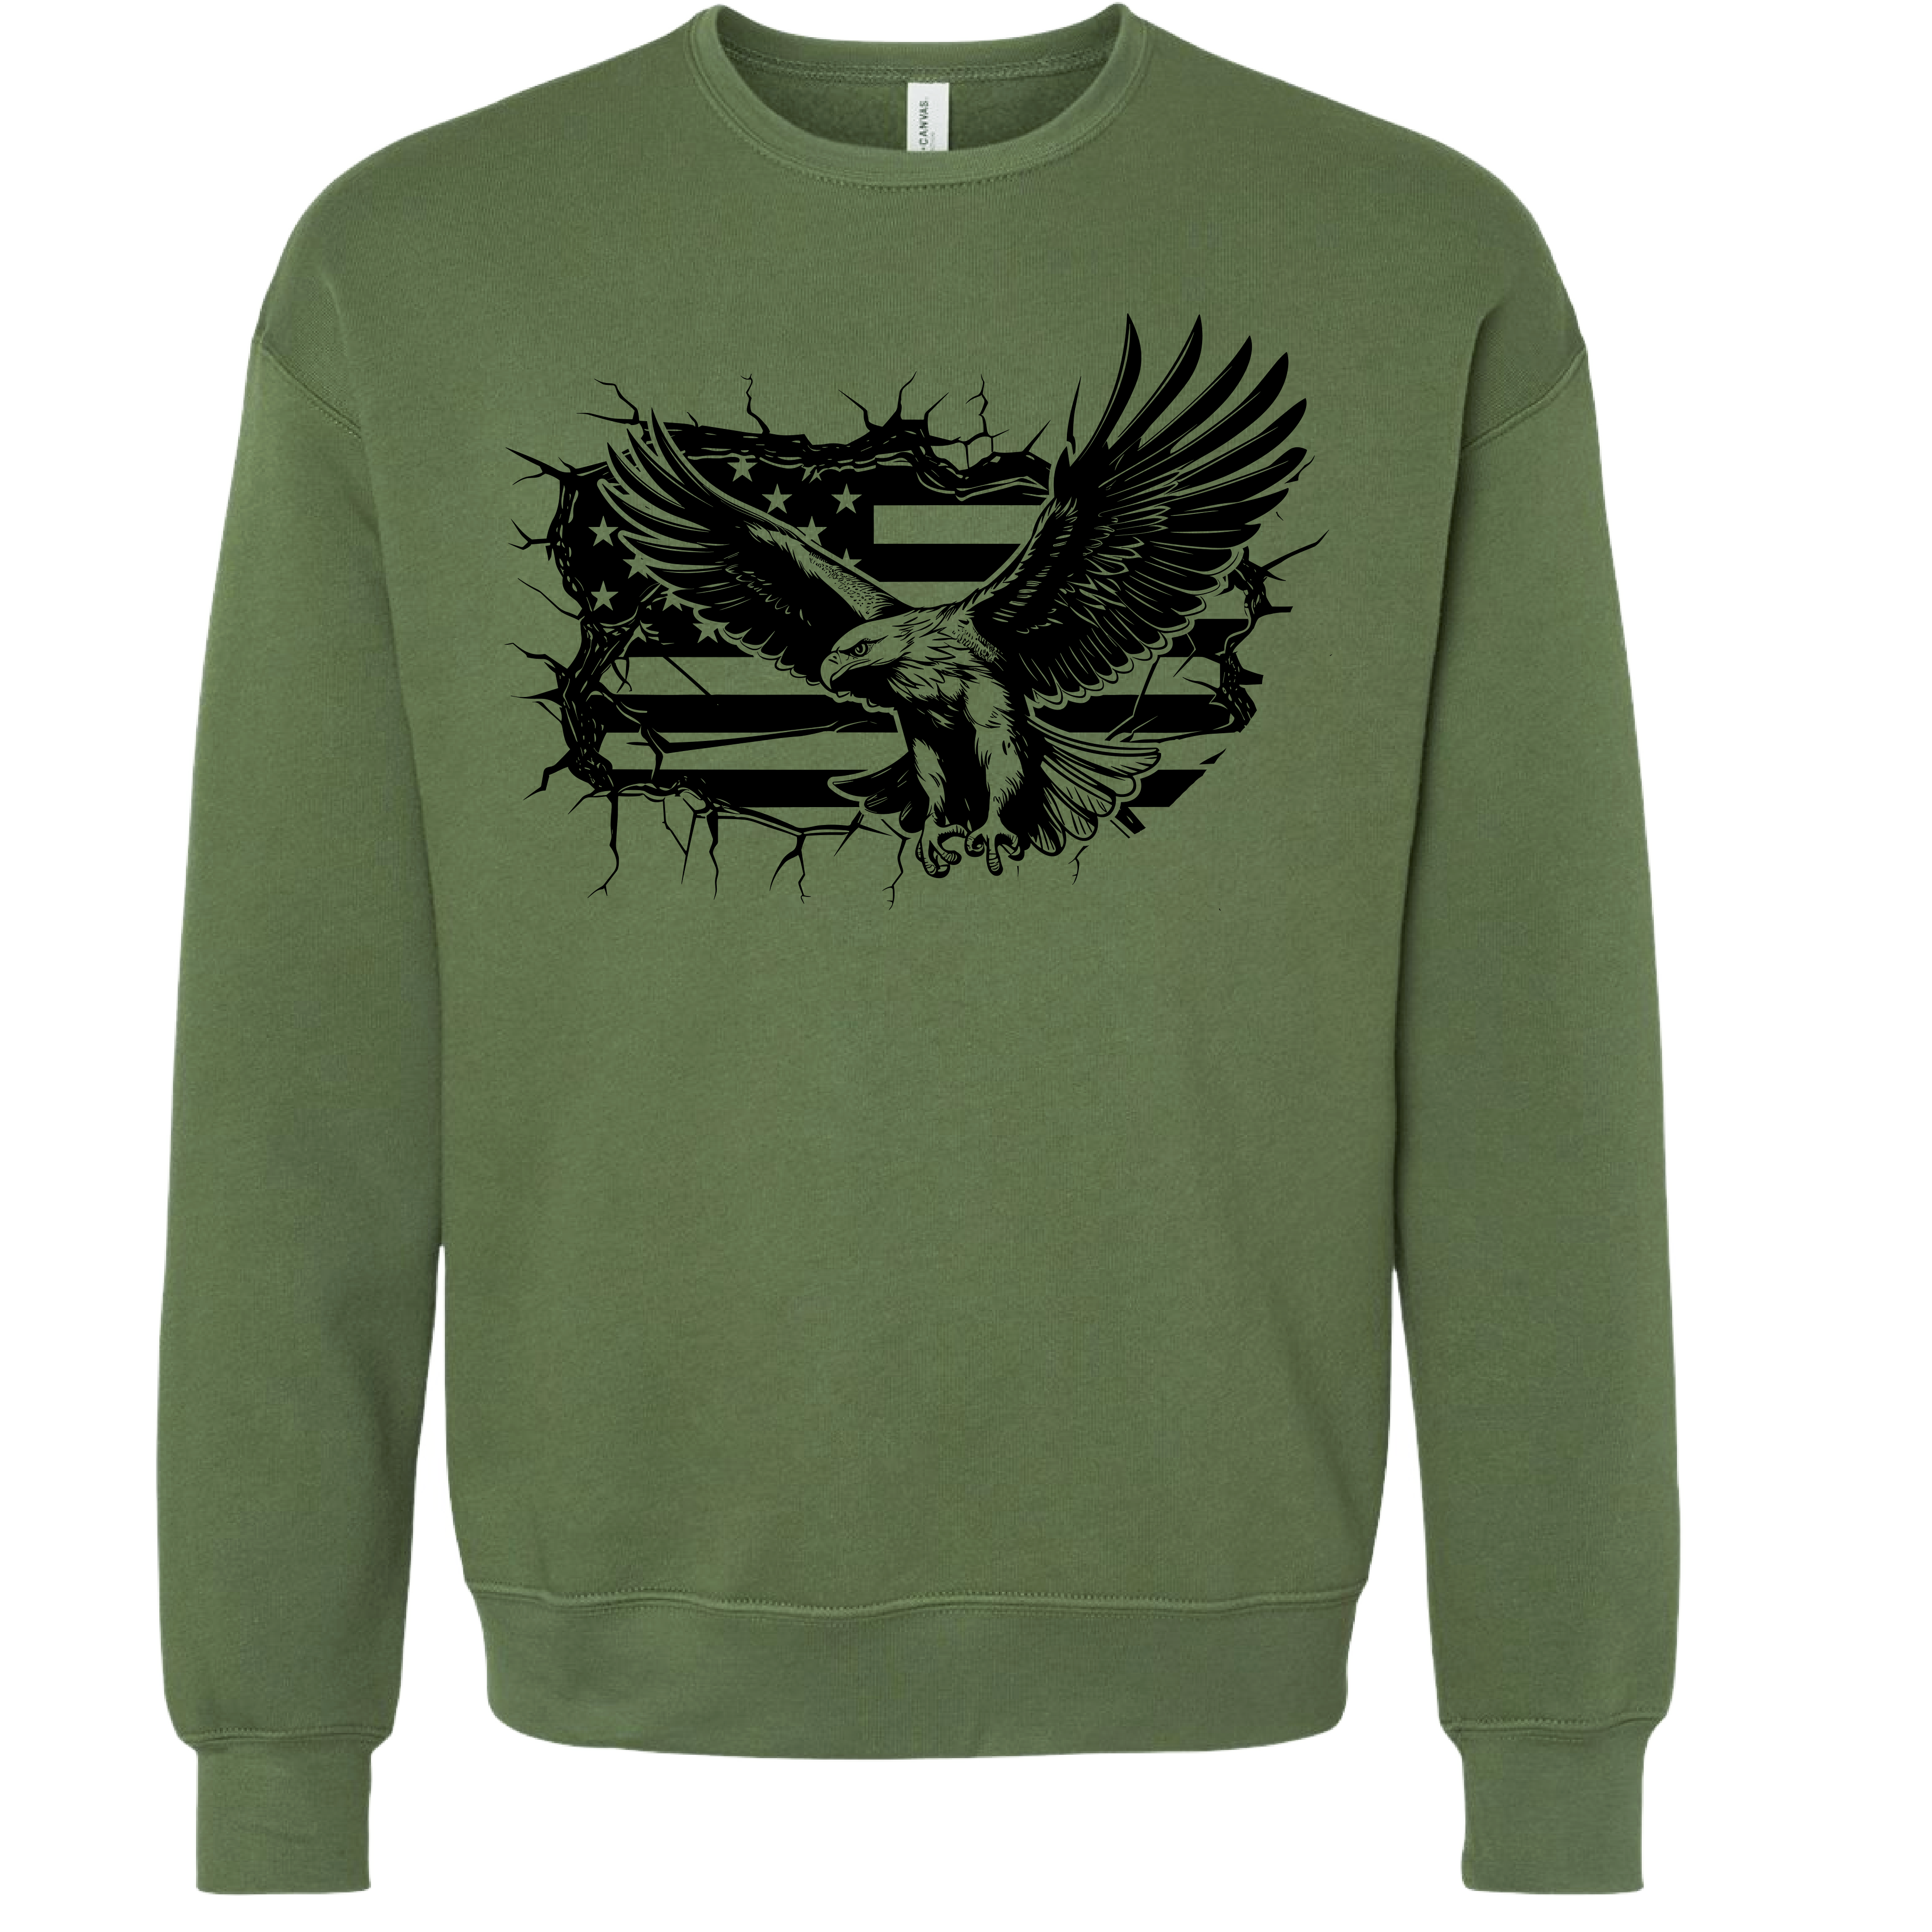 Eagle Flag  in Military Green in Tee OR Crew